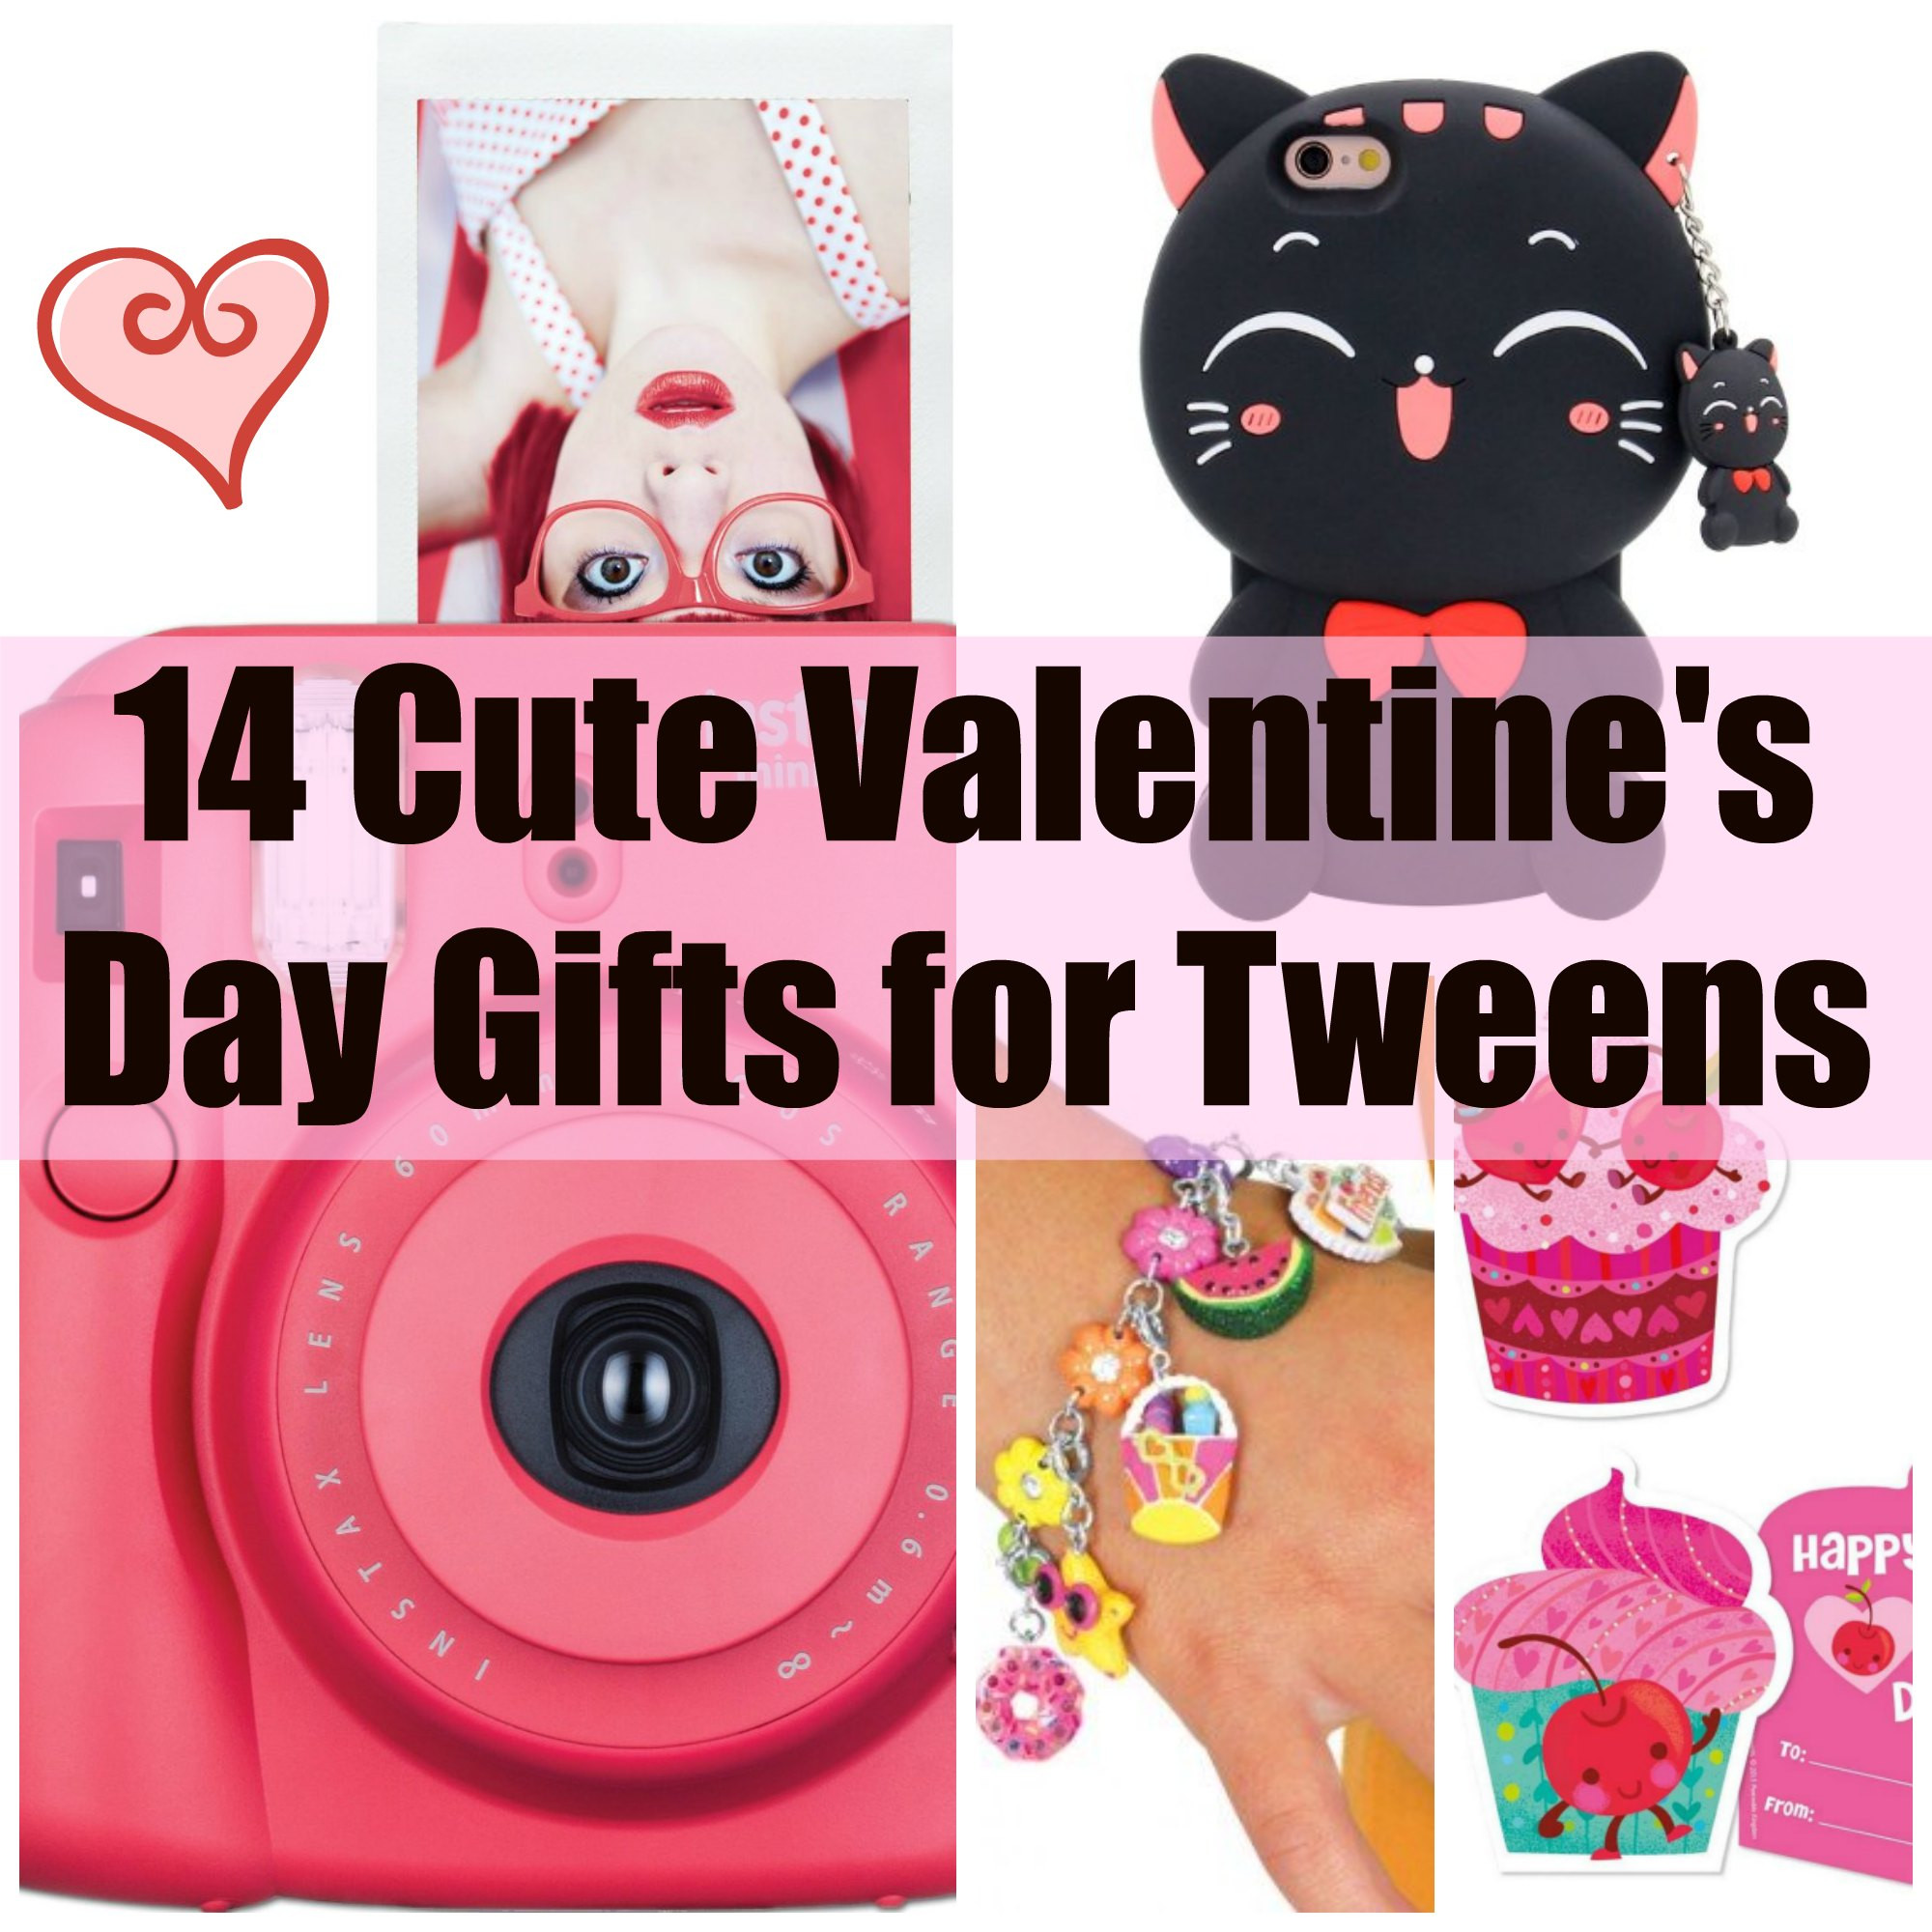 Valentine Gift Ideas For Teens
 14 Cute Valentine Gifts for Teens and Tweens